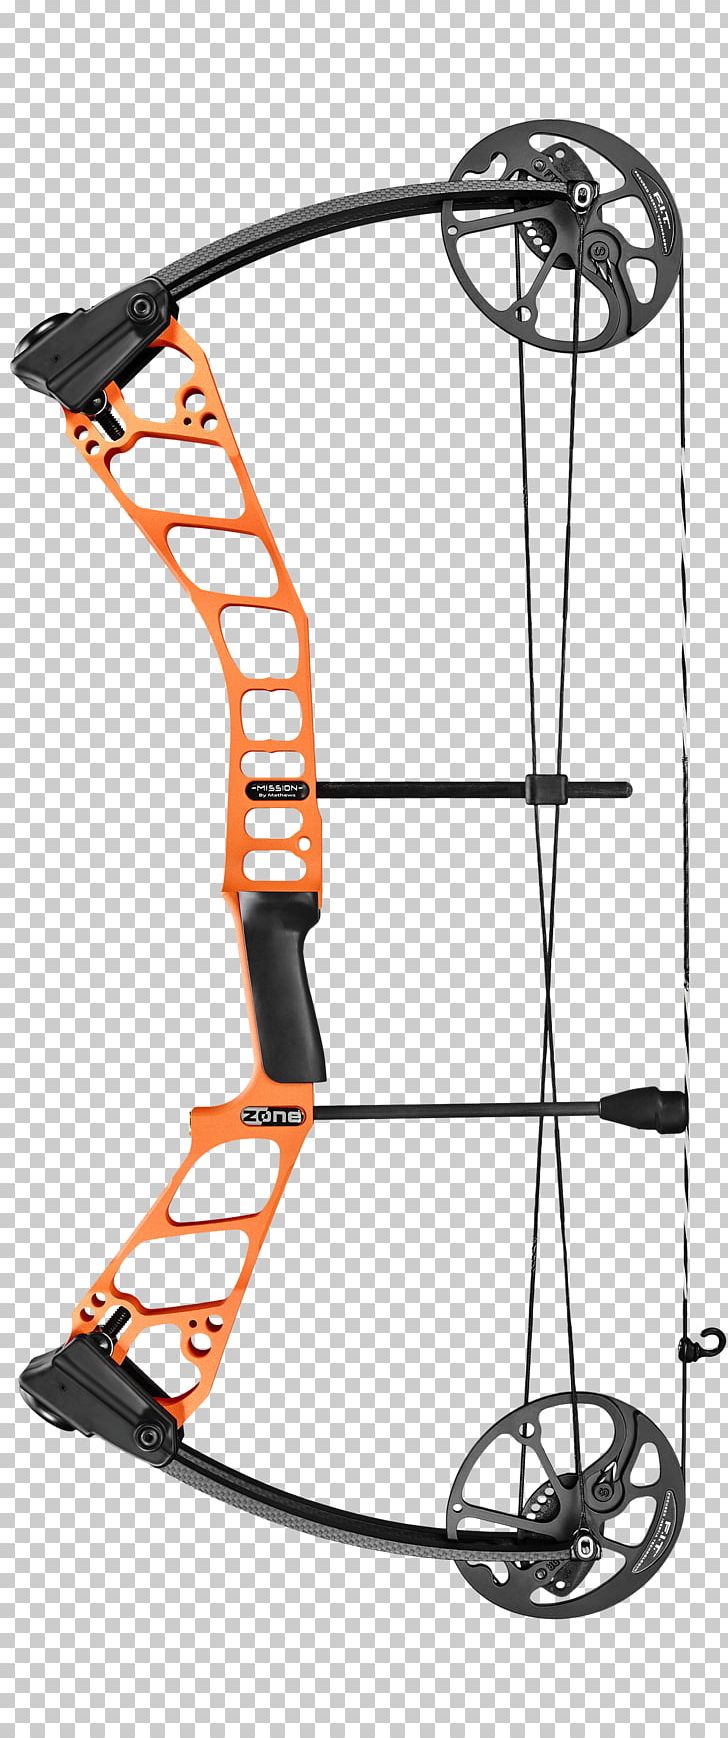 Compound Bows Bow And Arrow PSE Archery Bowhunting PNG, Clipart, Angle, Archery, Arrow Bow, Bicycle Accessory, Bow And Arrow Free PNG Download